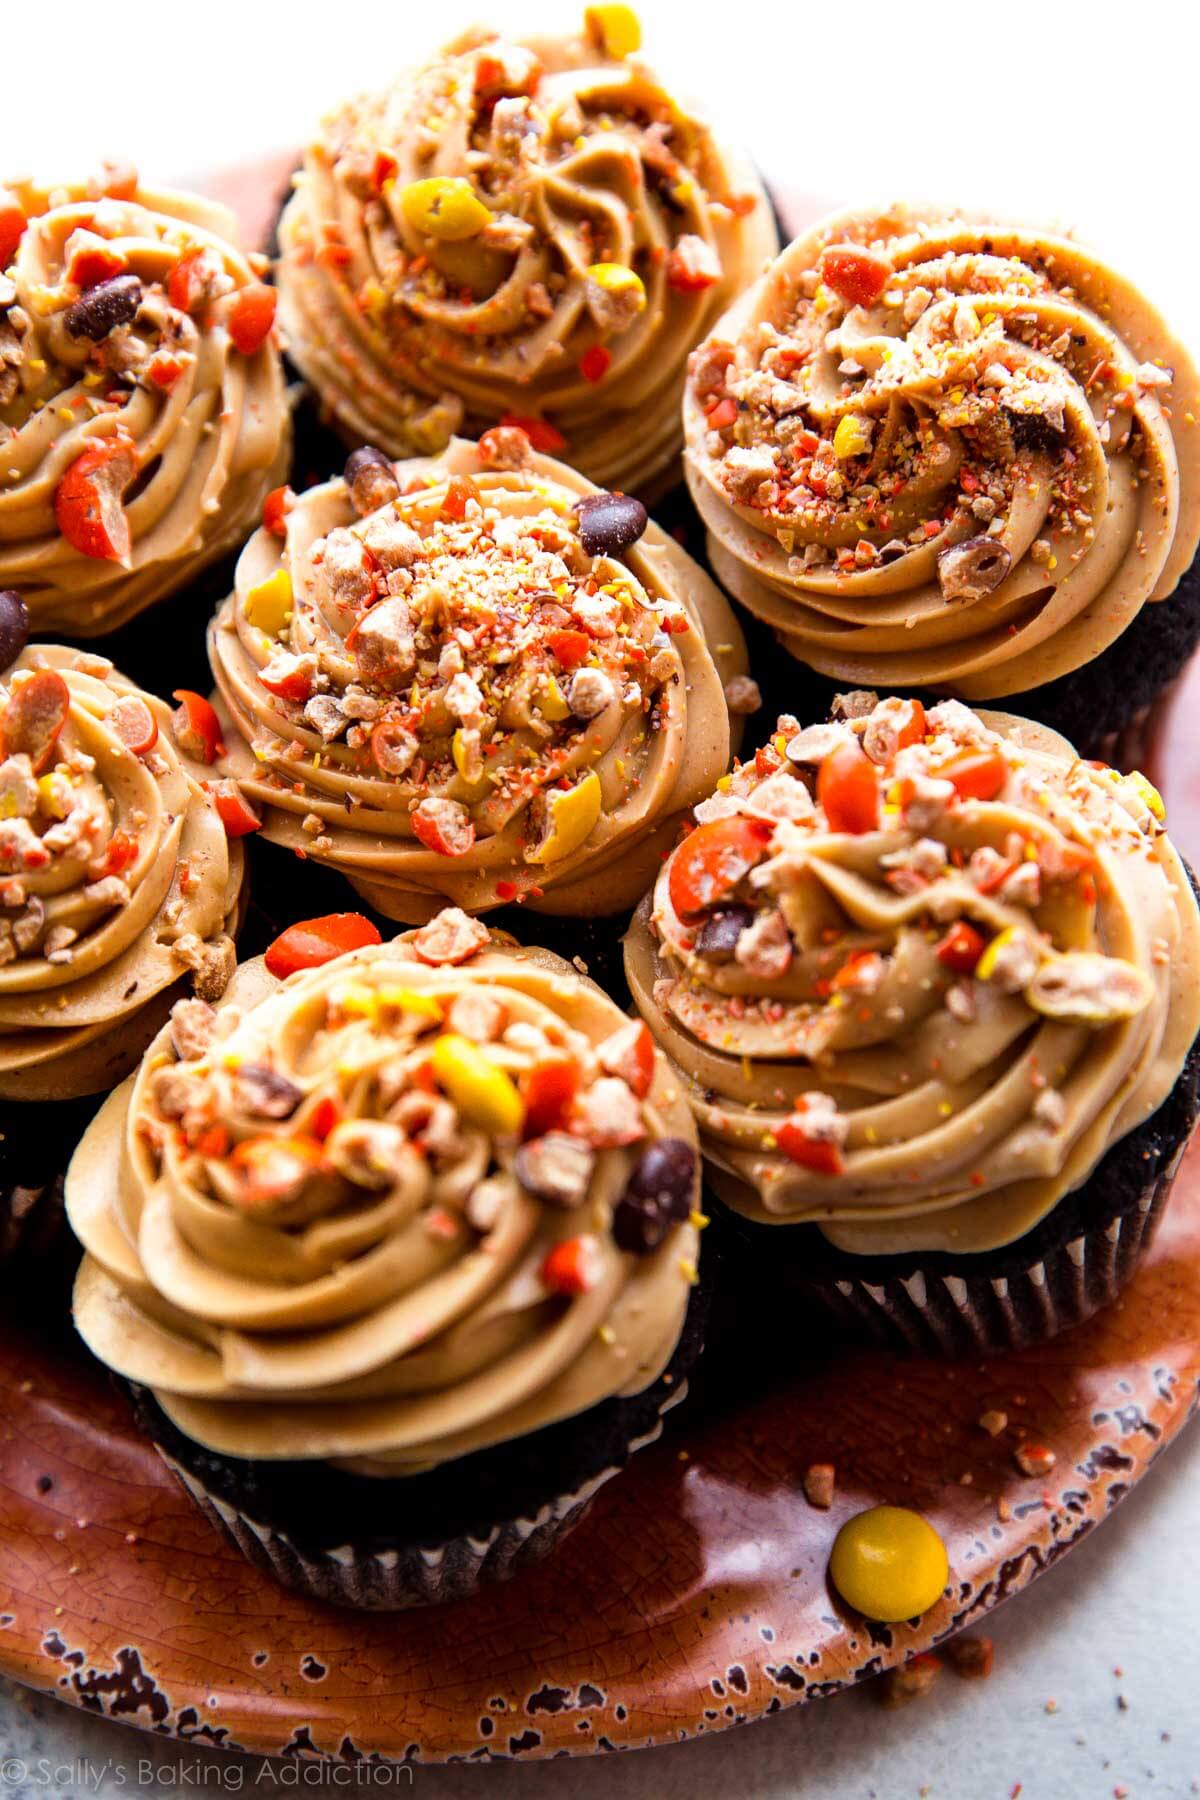 dark chocolate cupcakes on an orange plate topped with swirls of peanut butter frosting and crushed Reese's Pieces candies